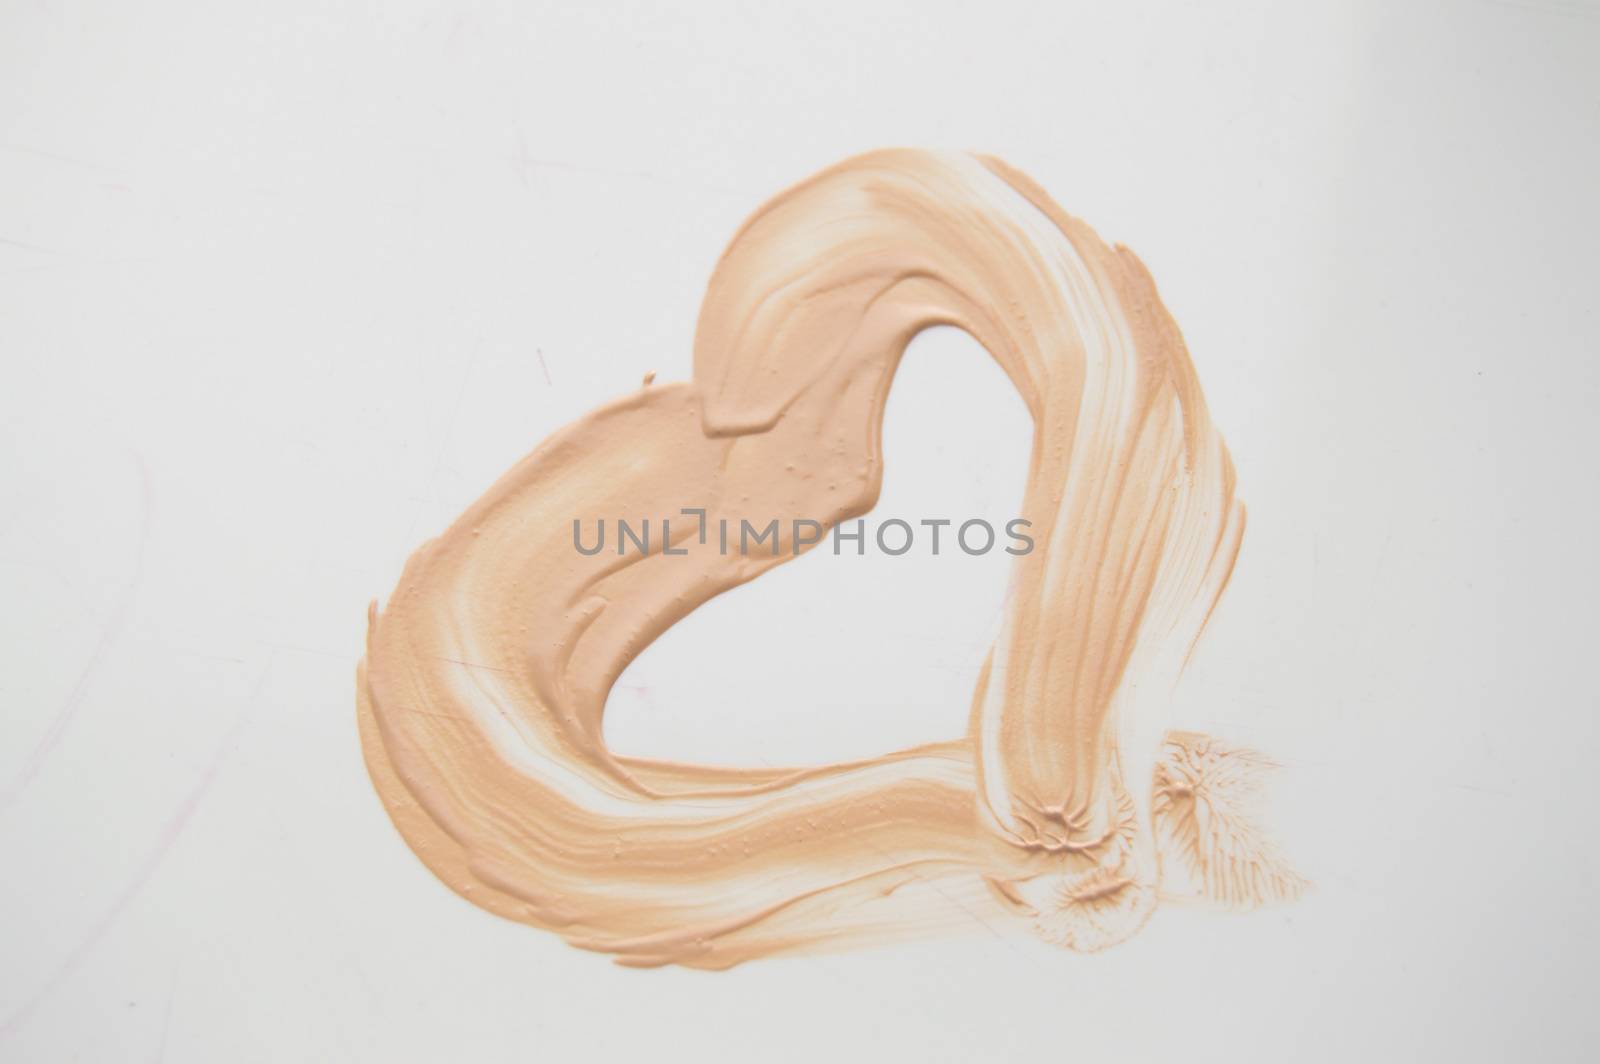 Painted heart, a smear of liquid type Foundation, concealer, white background by claire_lucia